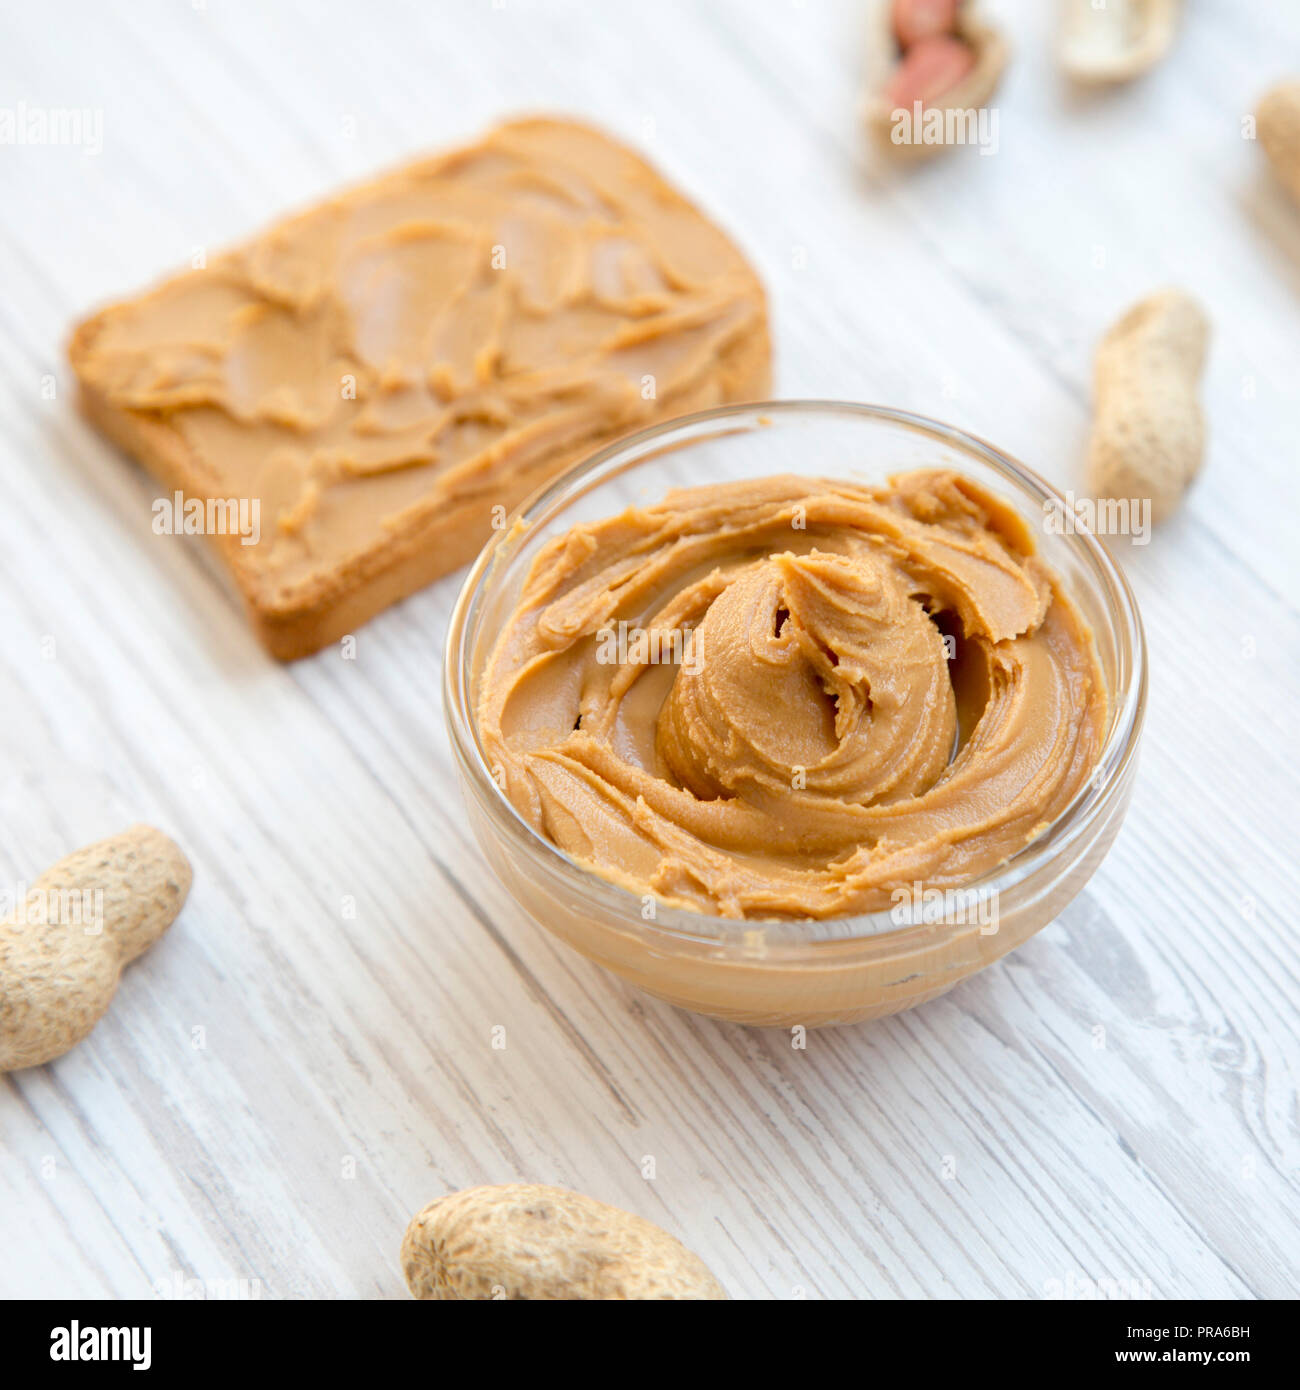 Toast, bowl of peanut butter and peanuts in shells on a white wooden table, side view. Close-up. Stock Photo